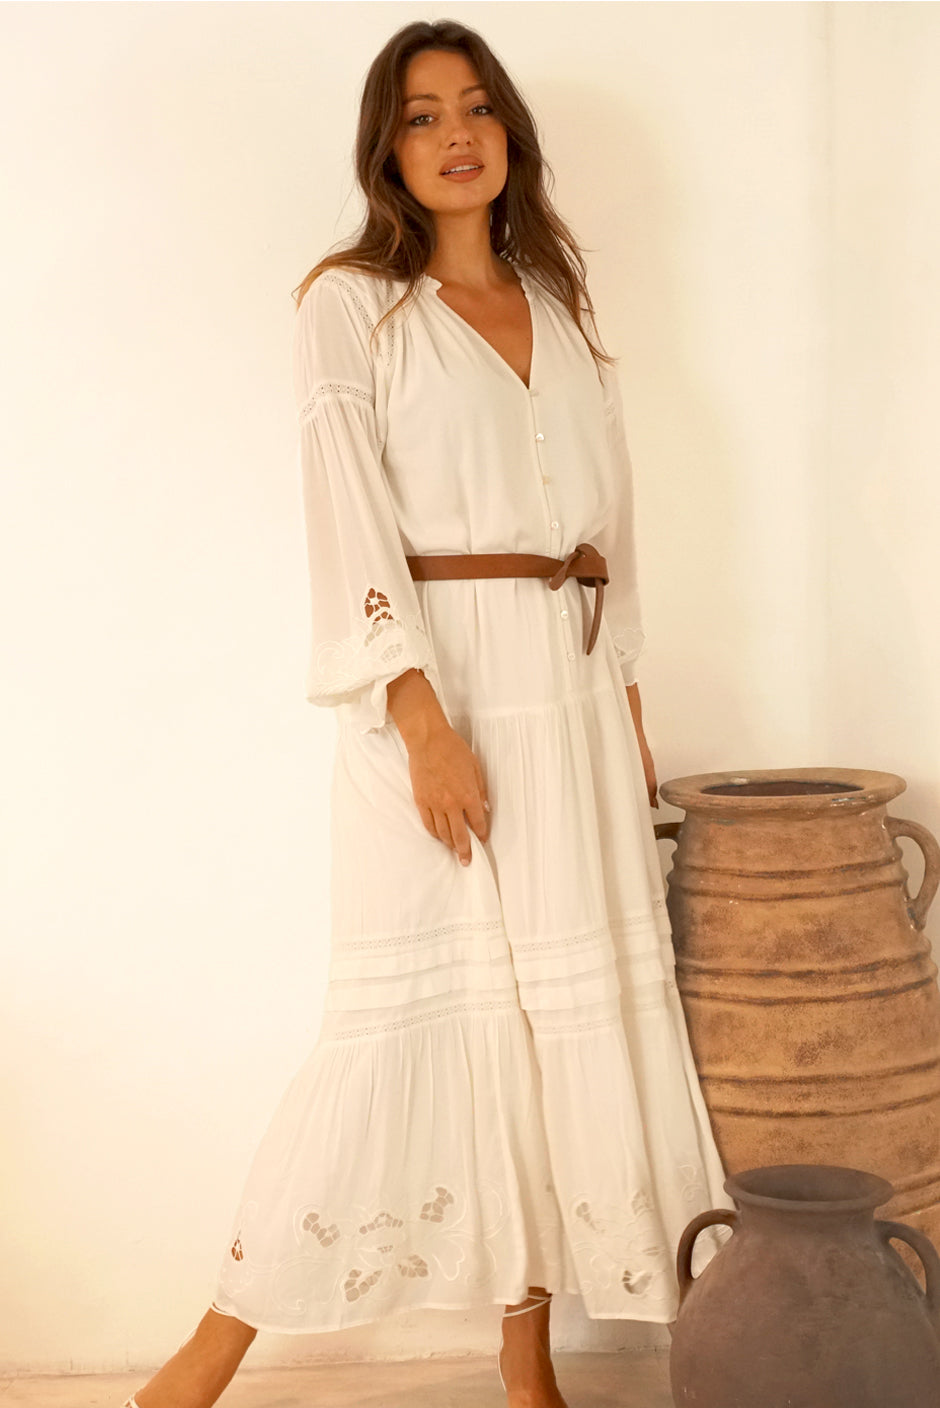 White Button-up Midi Dress for Women with lace and embroidery details in the sleeves and skirt, full length sleeves from Paneros Clothing: the Stevie Dress. Front View styled with leather belt.